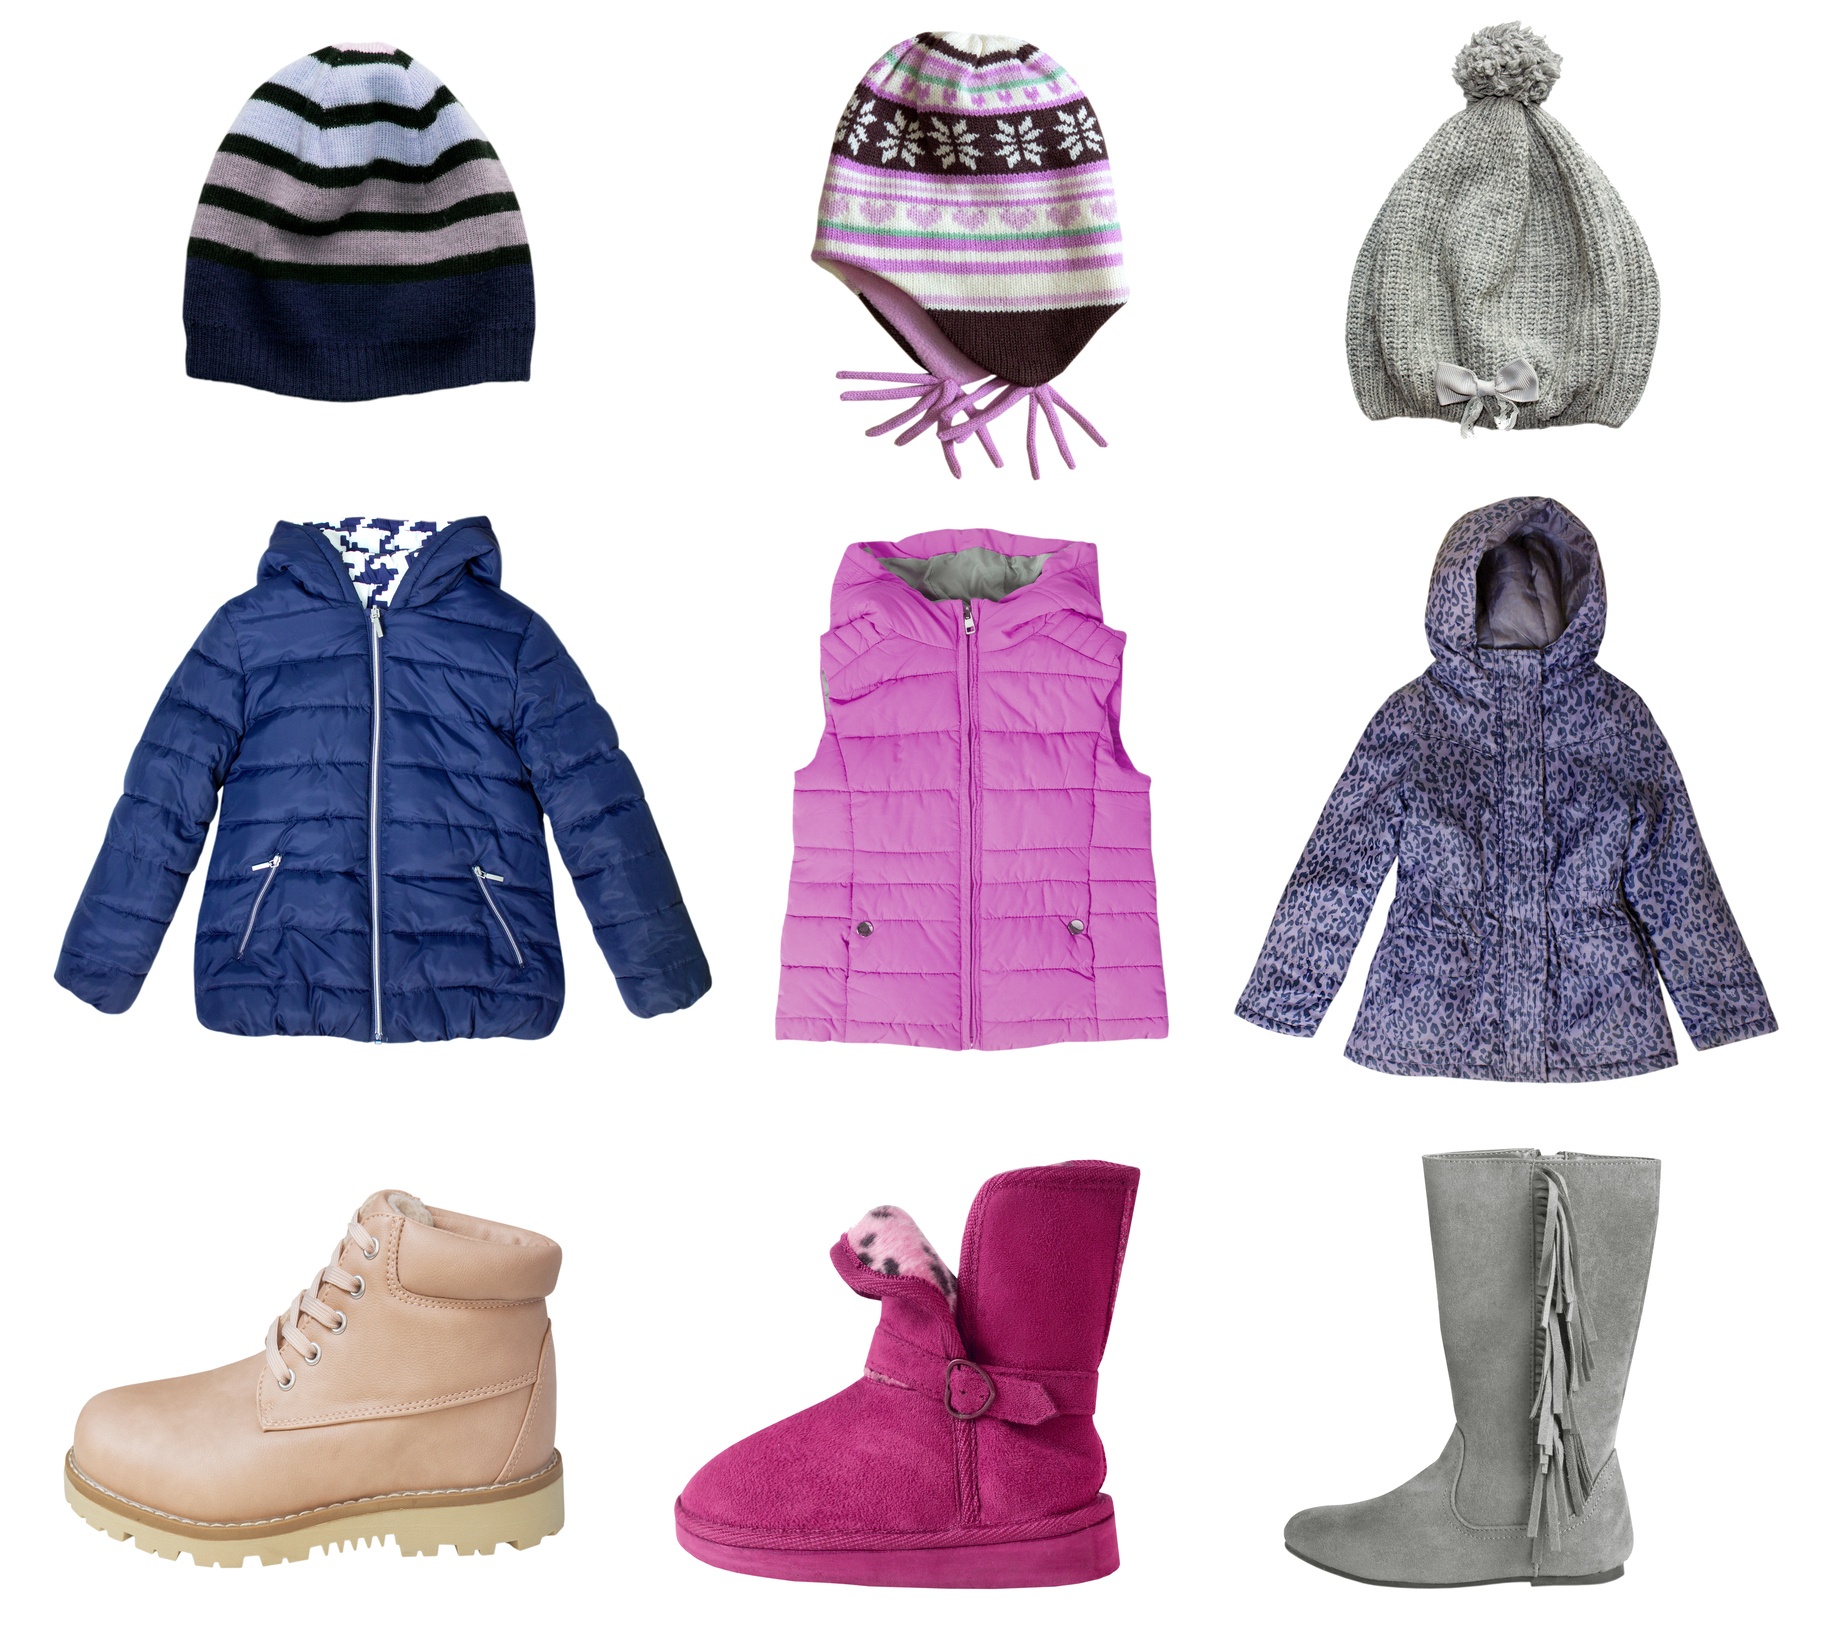 Buy Winter Gear in February + Cook Portable Warehouses